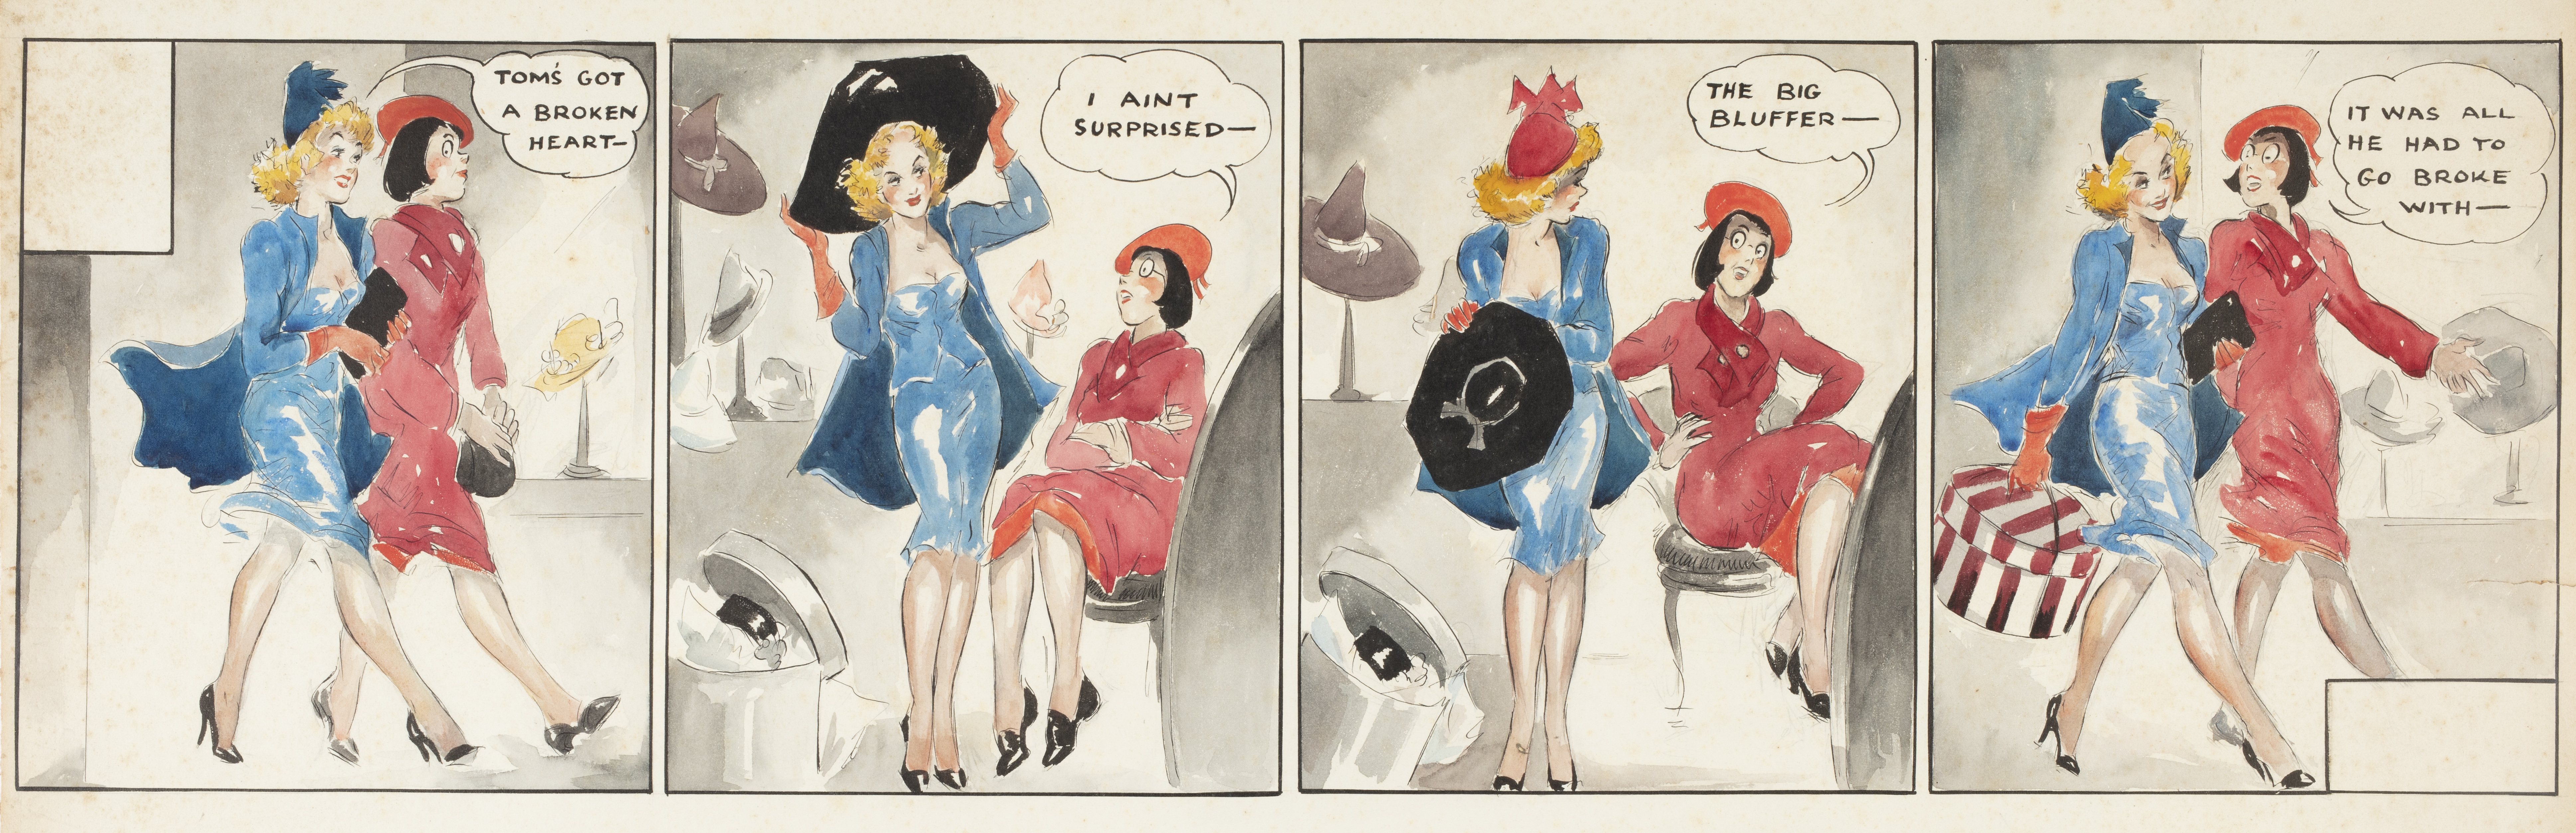 Four panel cartoon with two women talking while shopping.